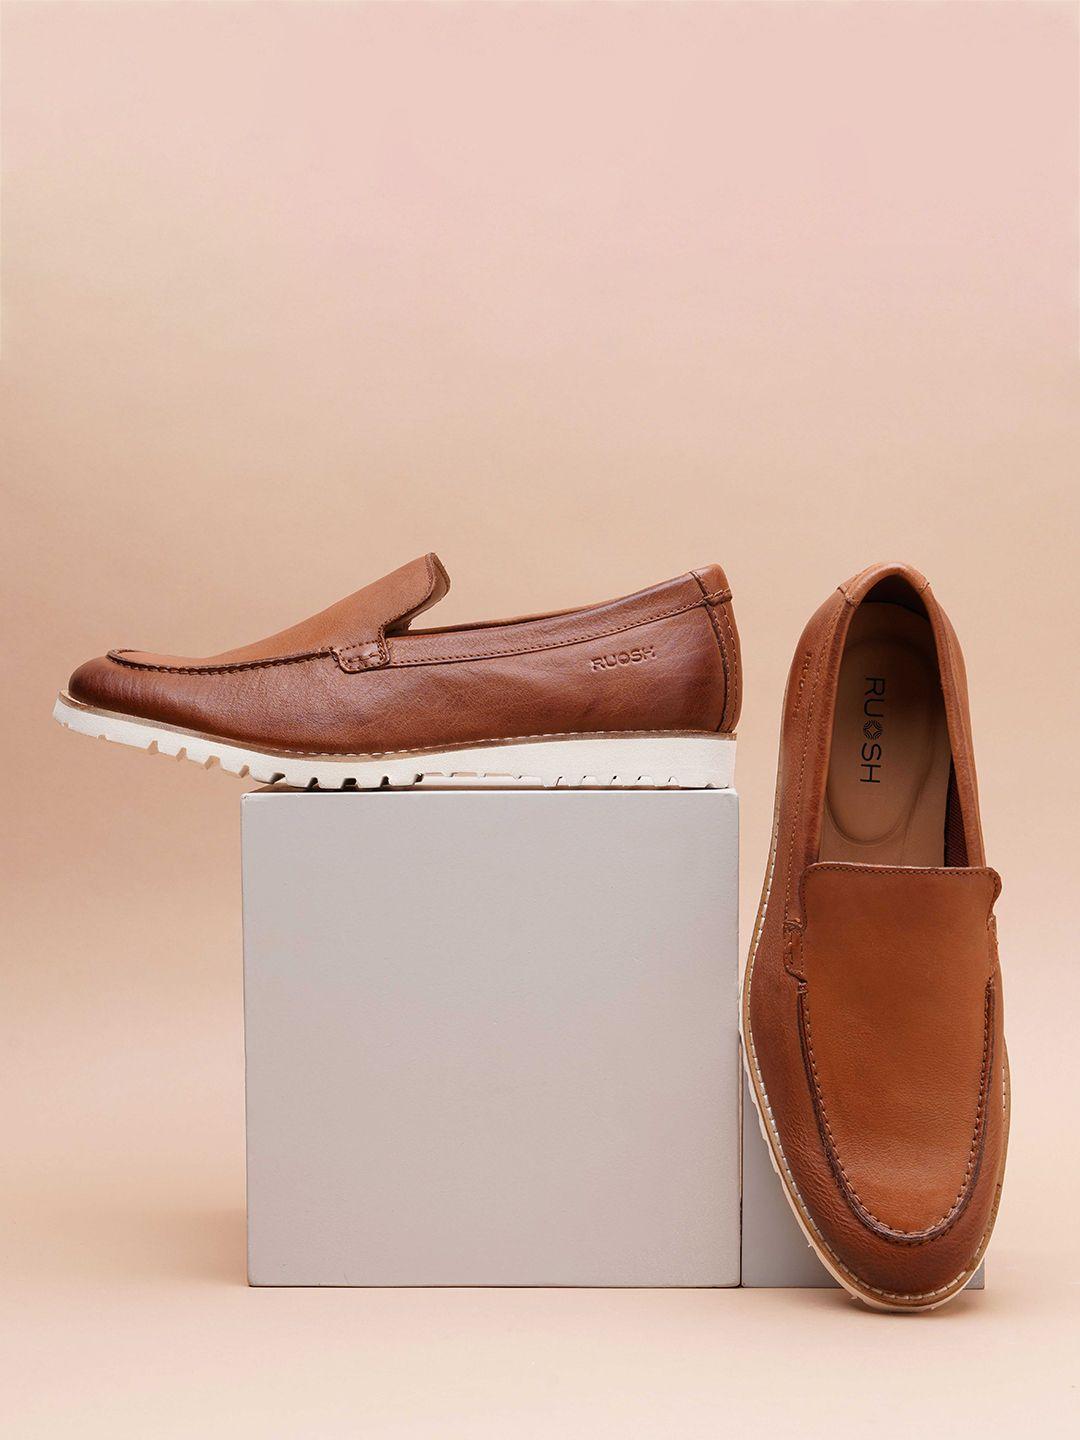 ruosh men textured leather loafers